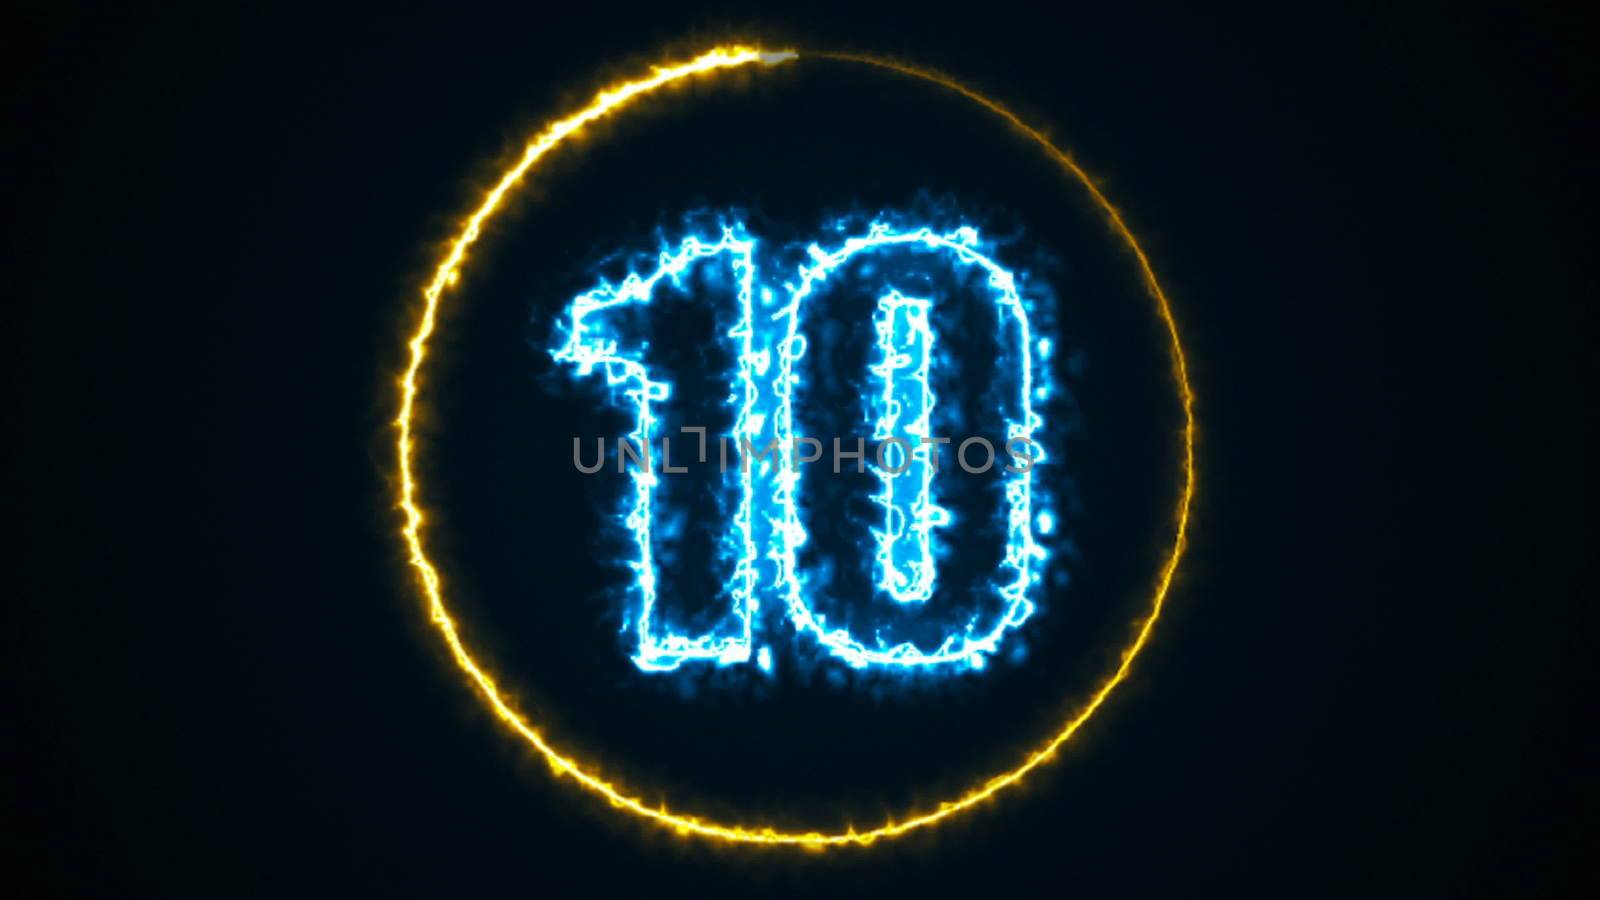 Abstract background with energy number. Digital 3d rendering. Isolated digital sign on a black background